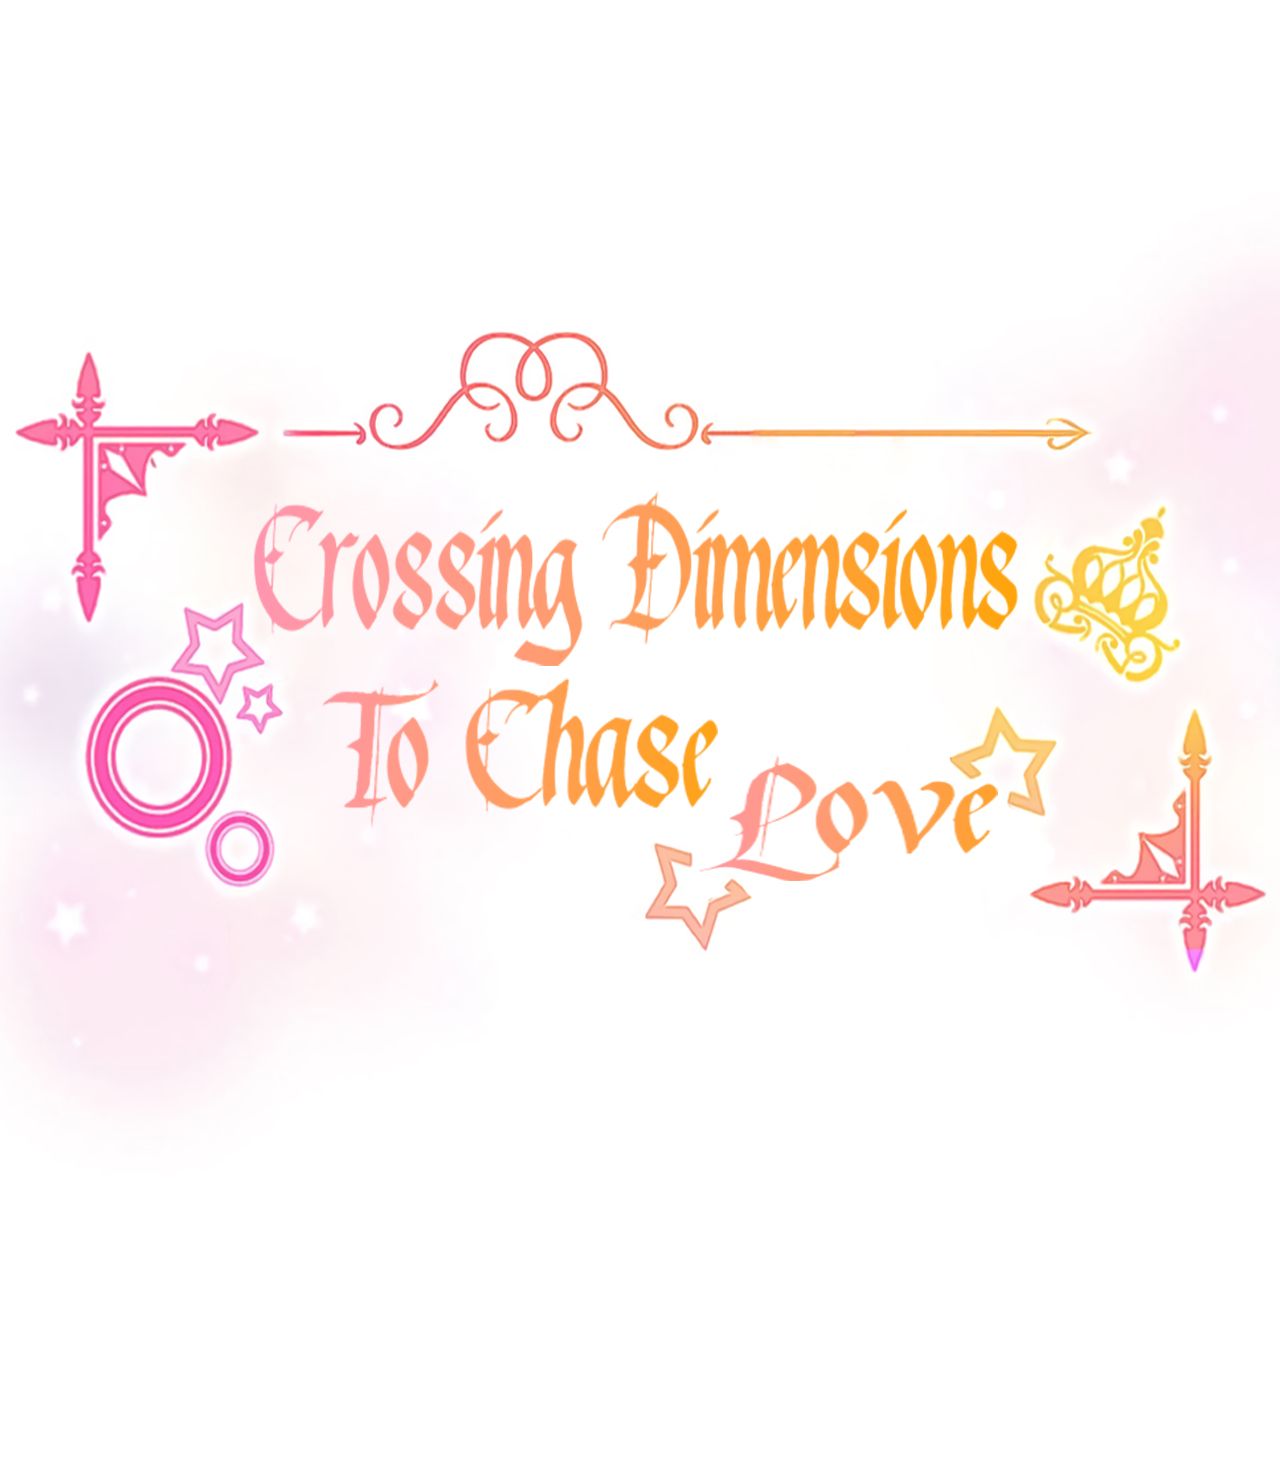 Crossing Dimensions To Chase Love - chapter 0 - #2